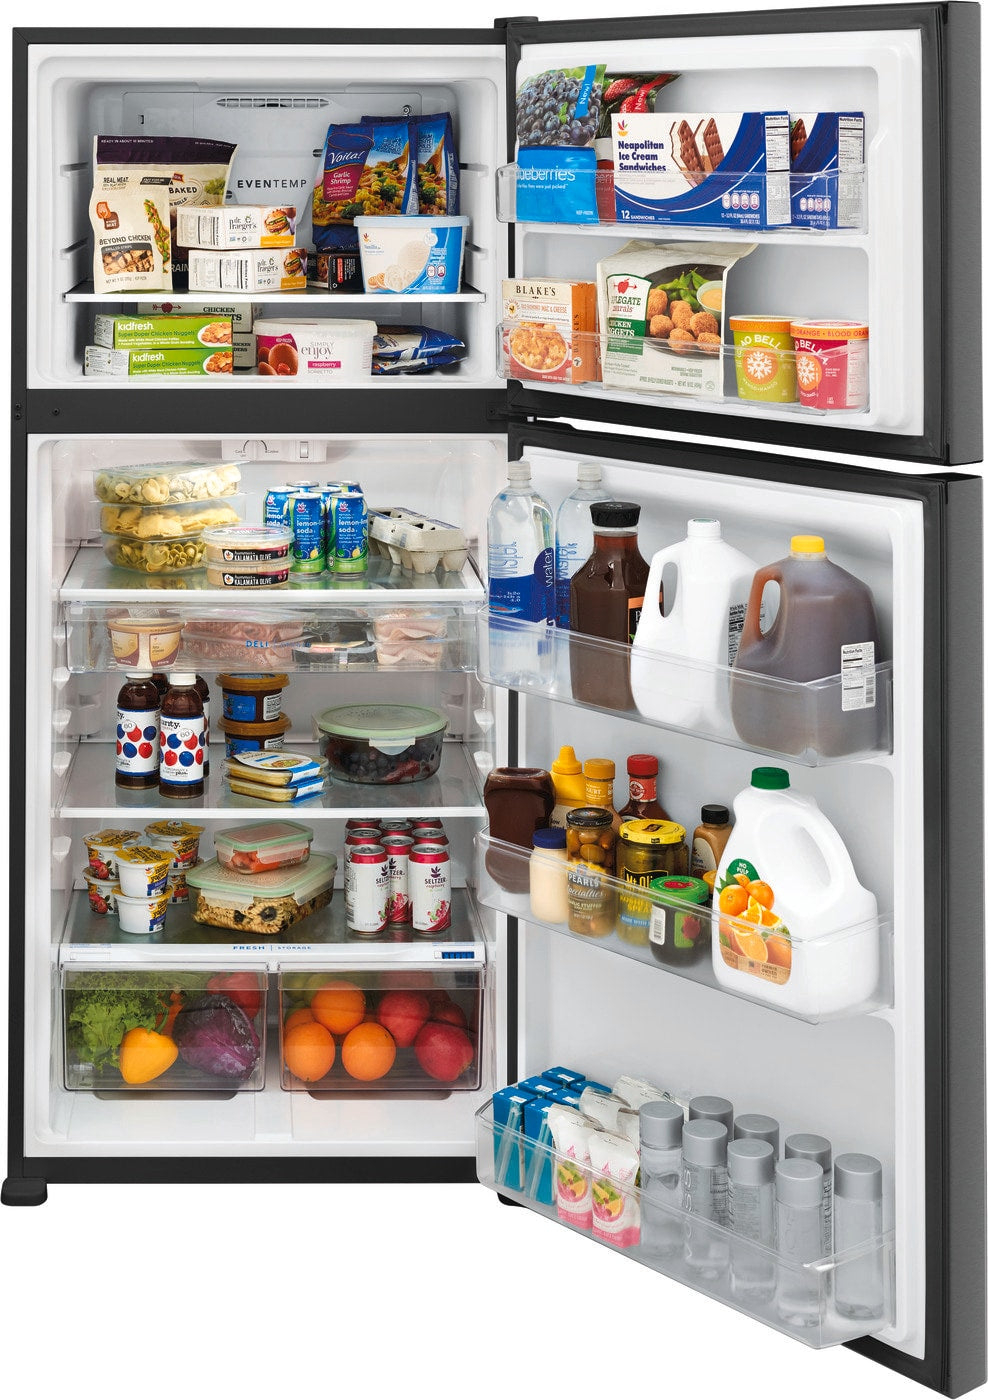 Frigidaire - 30 Inch 20 cu. ft Top Mount Refrigerator in Black Stainless - FFTR2045VD